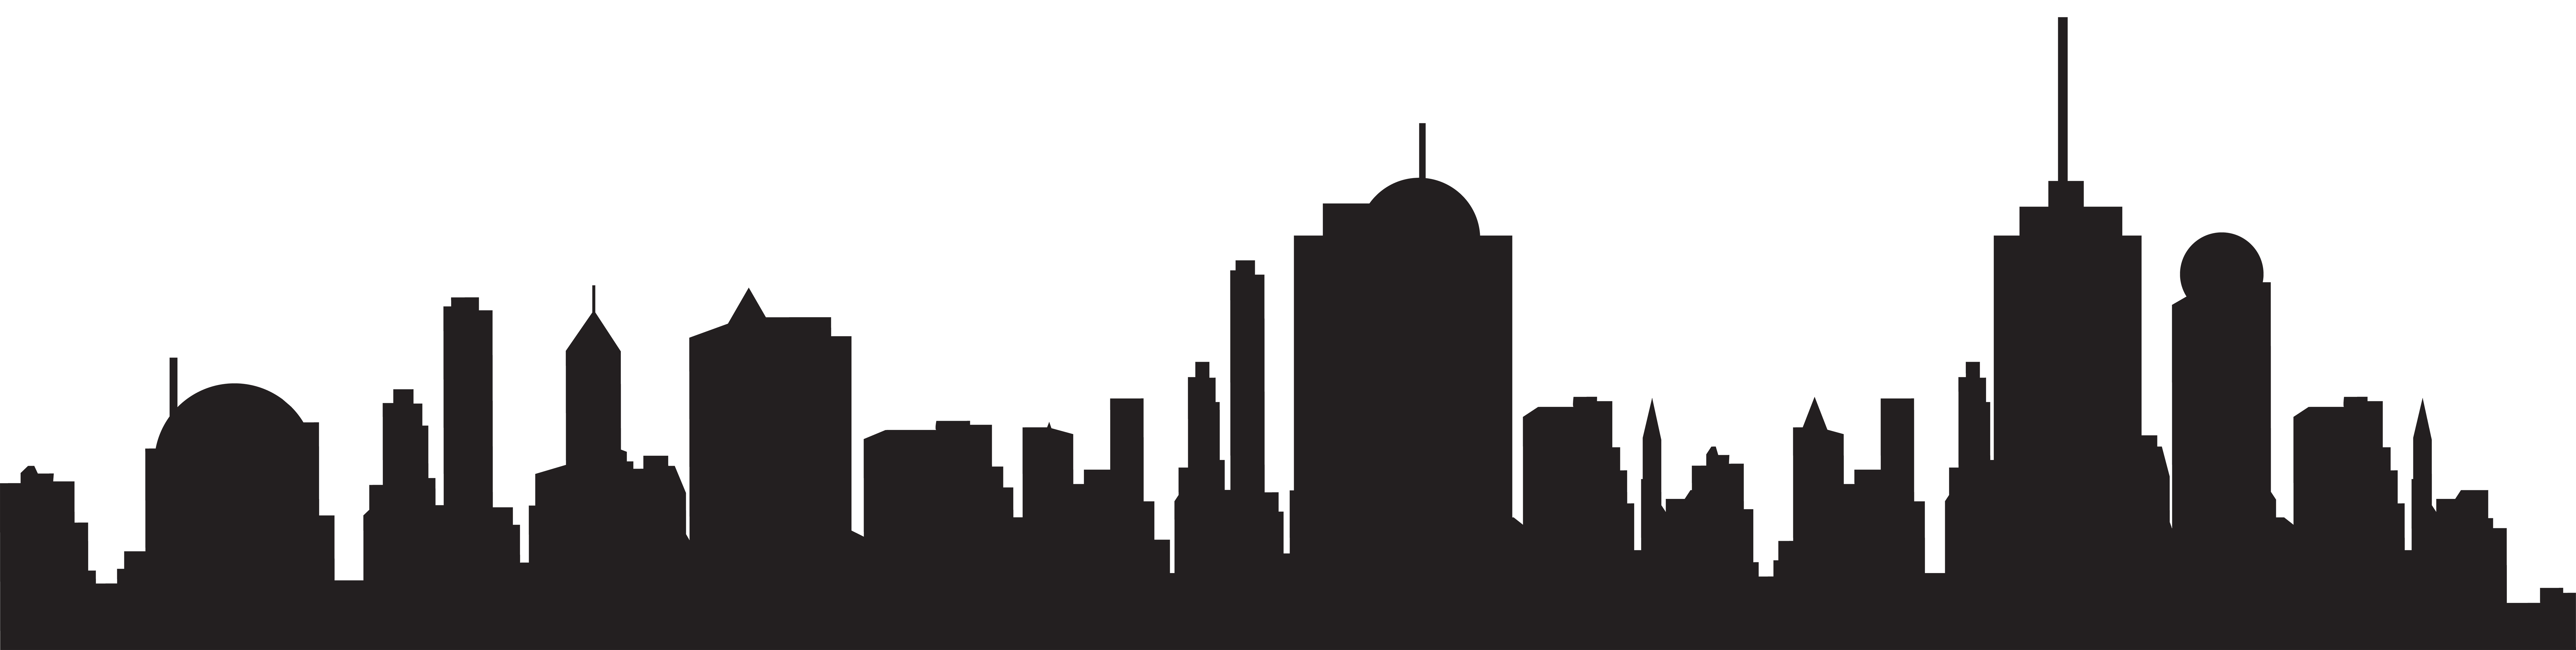 City Silhouette Png Clip Art Gallery Yopriceville High Quality Free